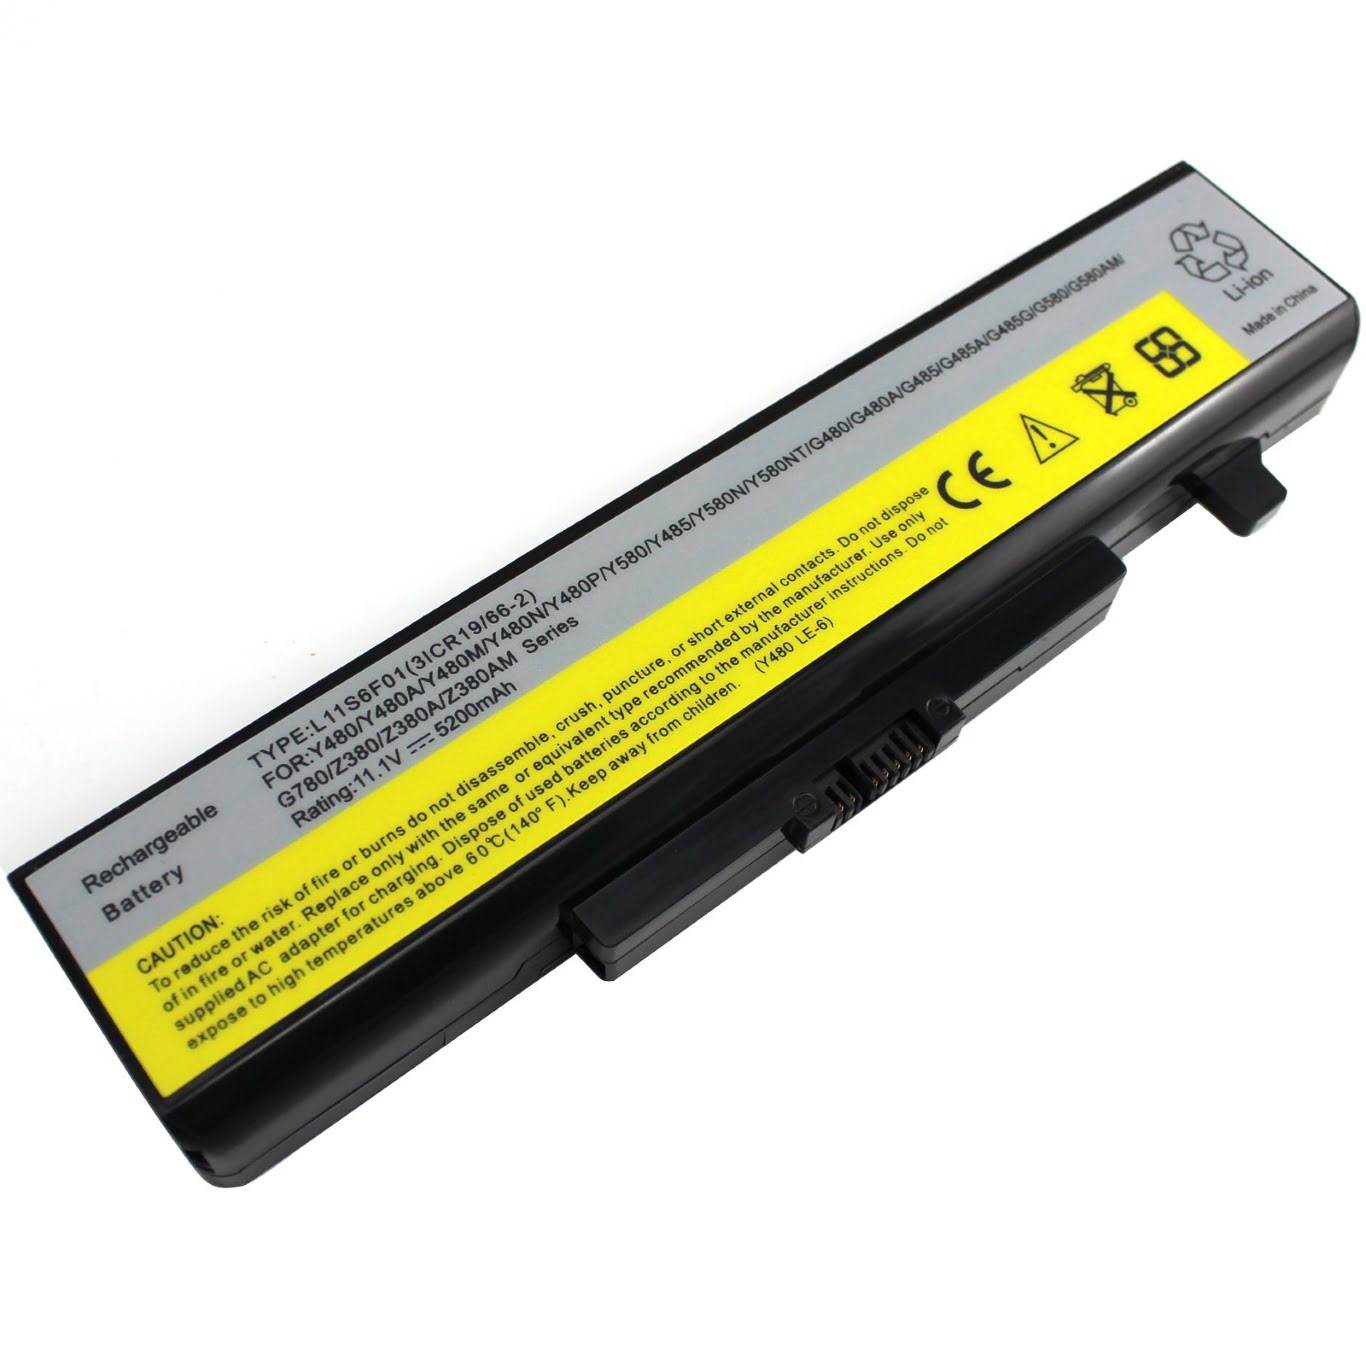 121500049, ASM45N1048 replacement Laptop Battery for Lenovo G400 Series, G480 Series, 10.8V, 4400mAh, 6 cells